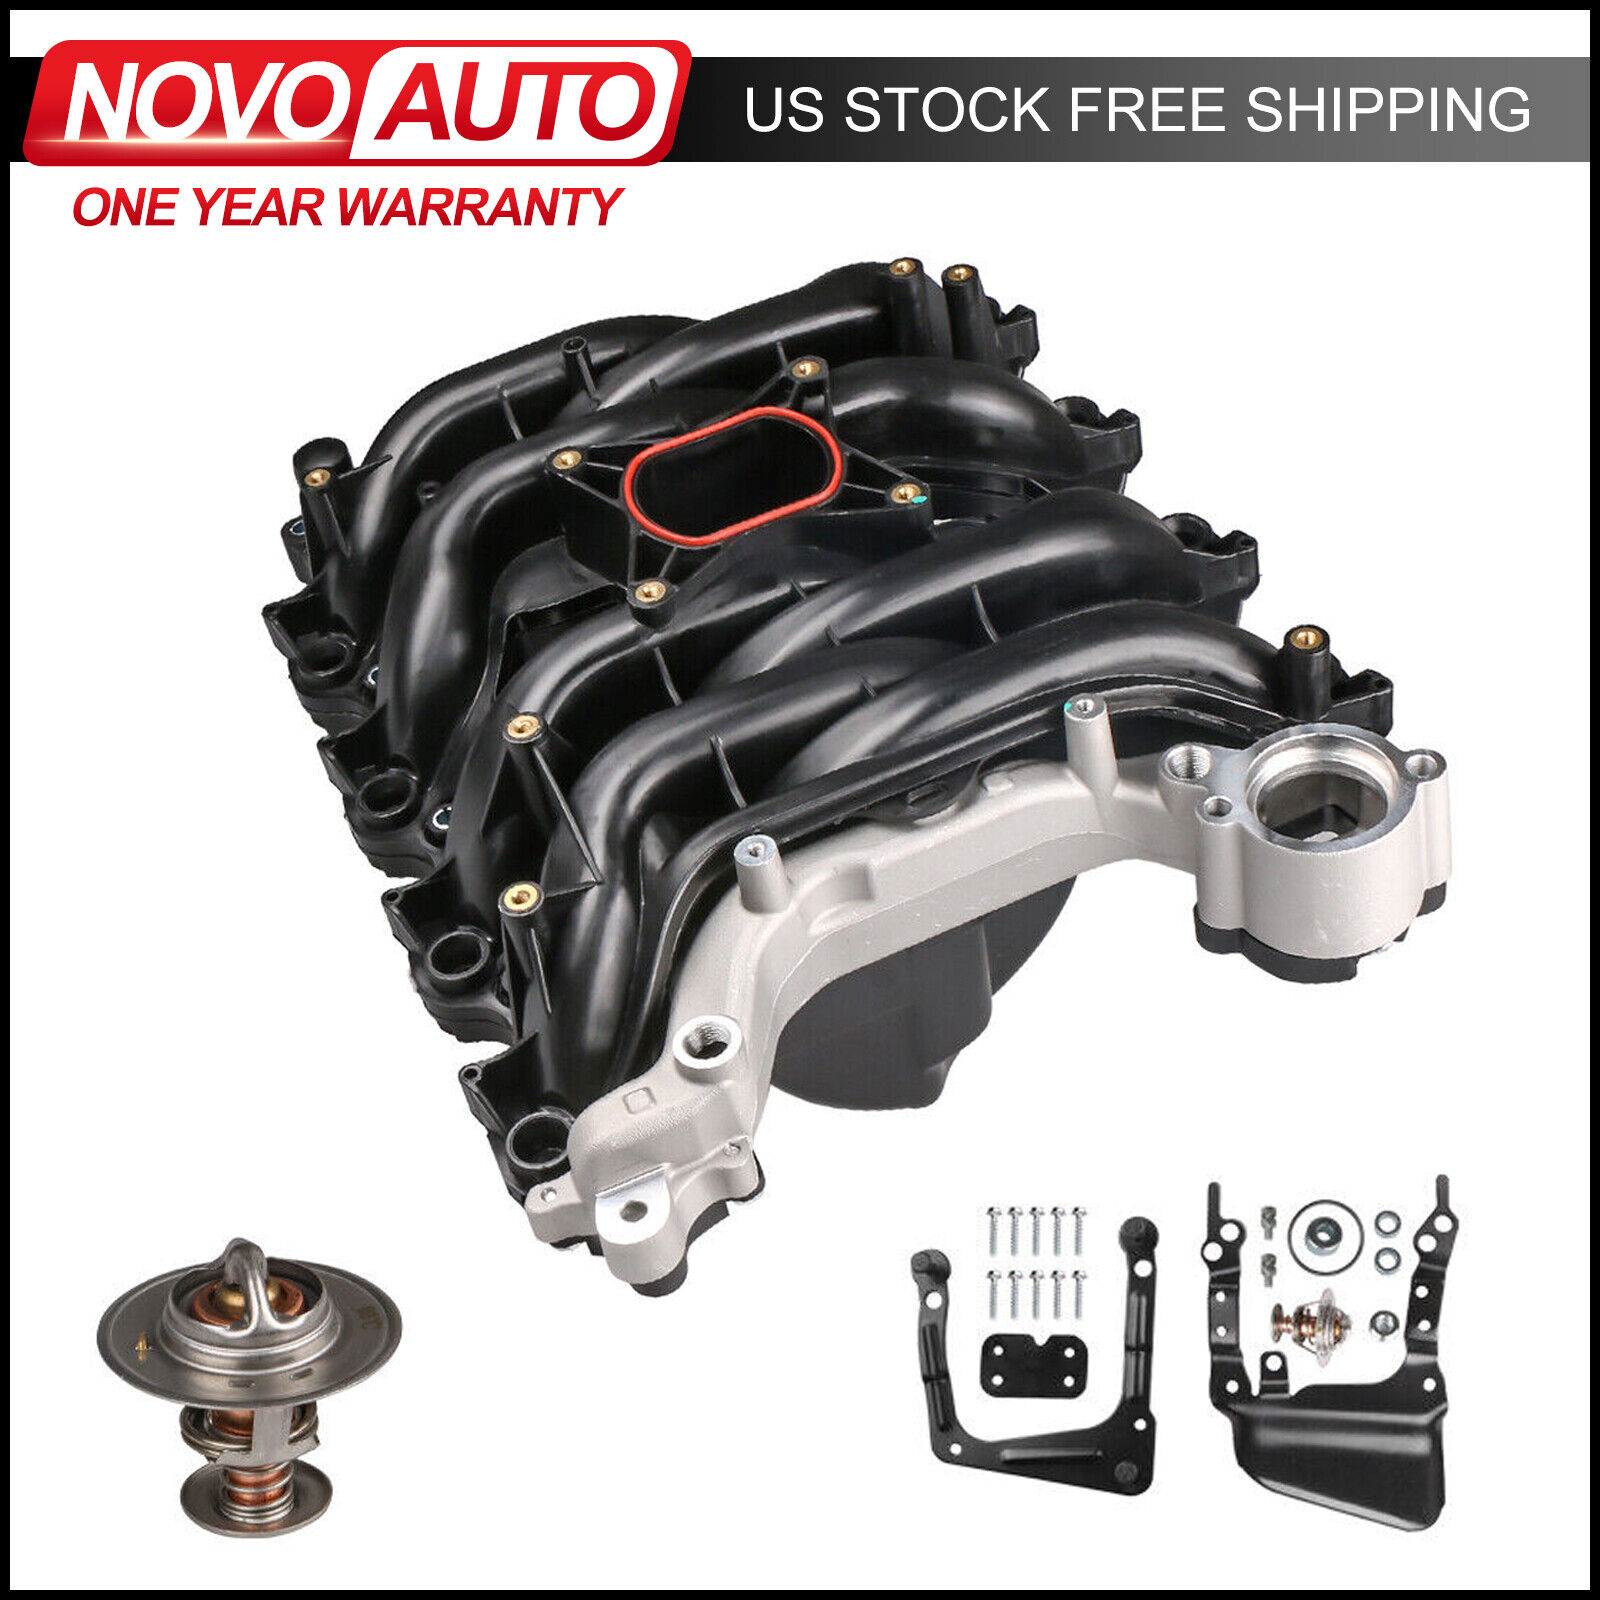 Upper Intake Manifold For Mustang Crown Victoria Grand Marquis Town Car V8 4.6L